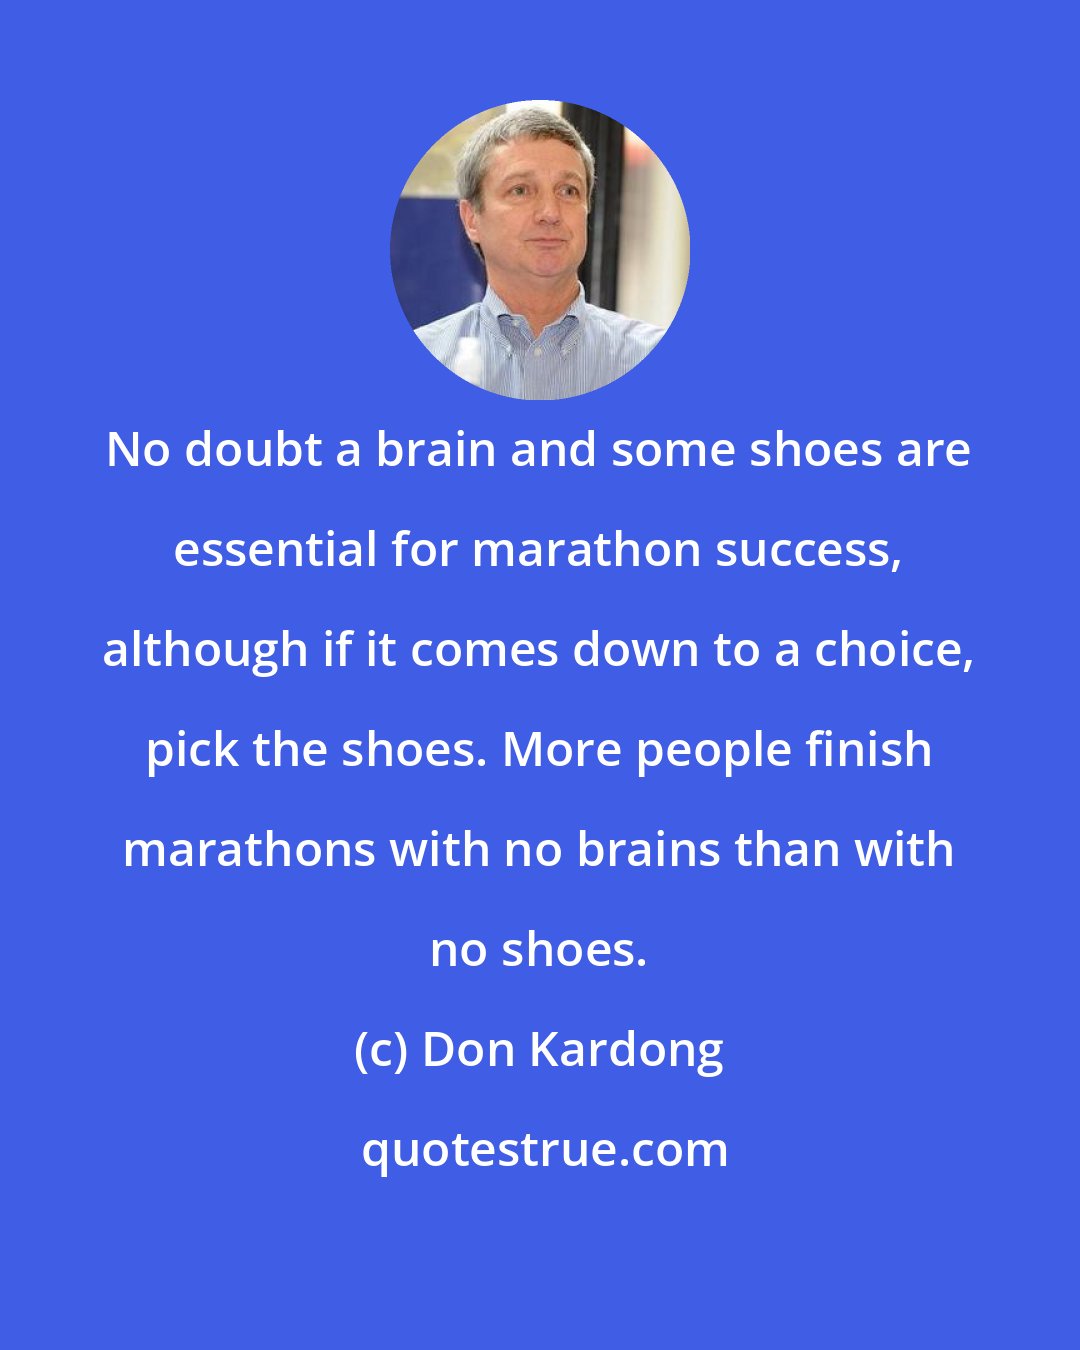 Don Kardong: No doubt a brain and some shoes are essential for marathon success, although if it comes down to a choice, pick the shoes. More people finish marathons with no brains than with no shoes.